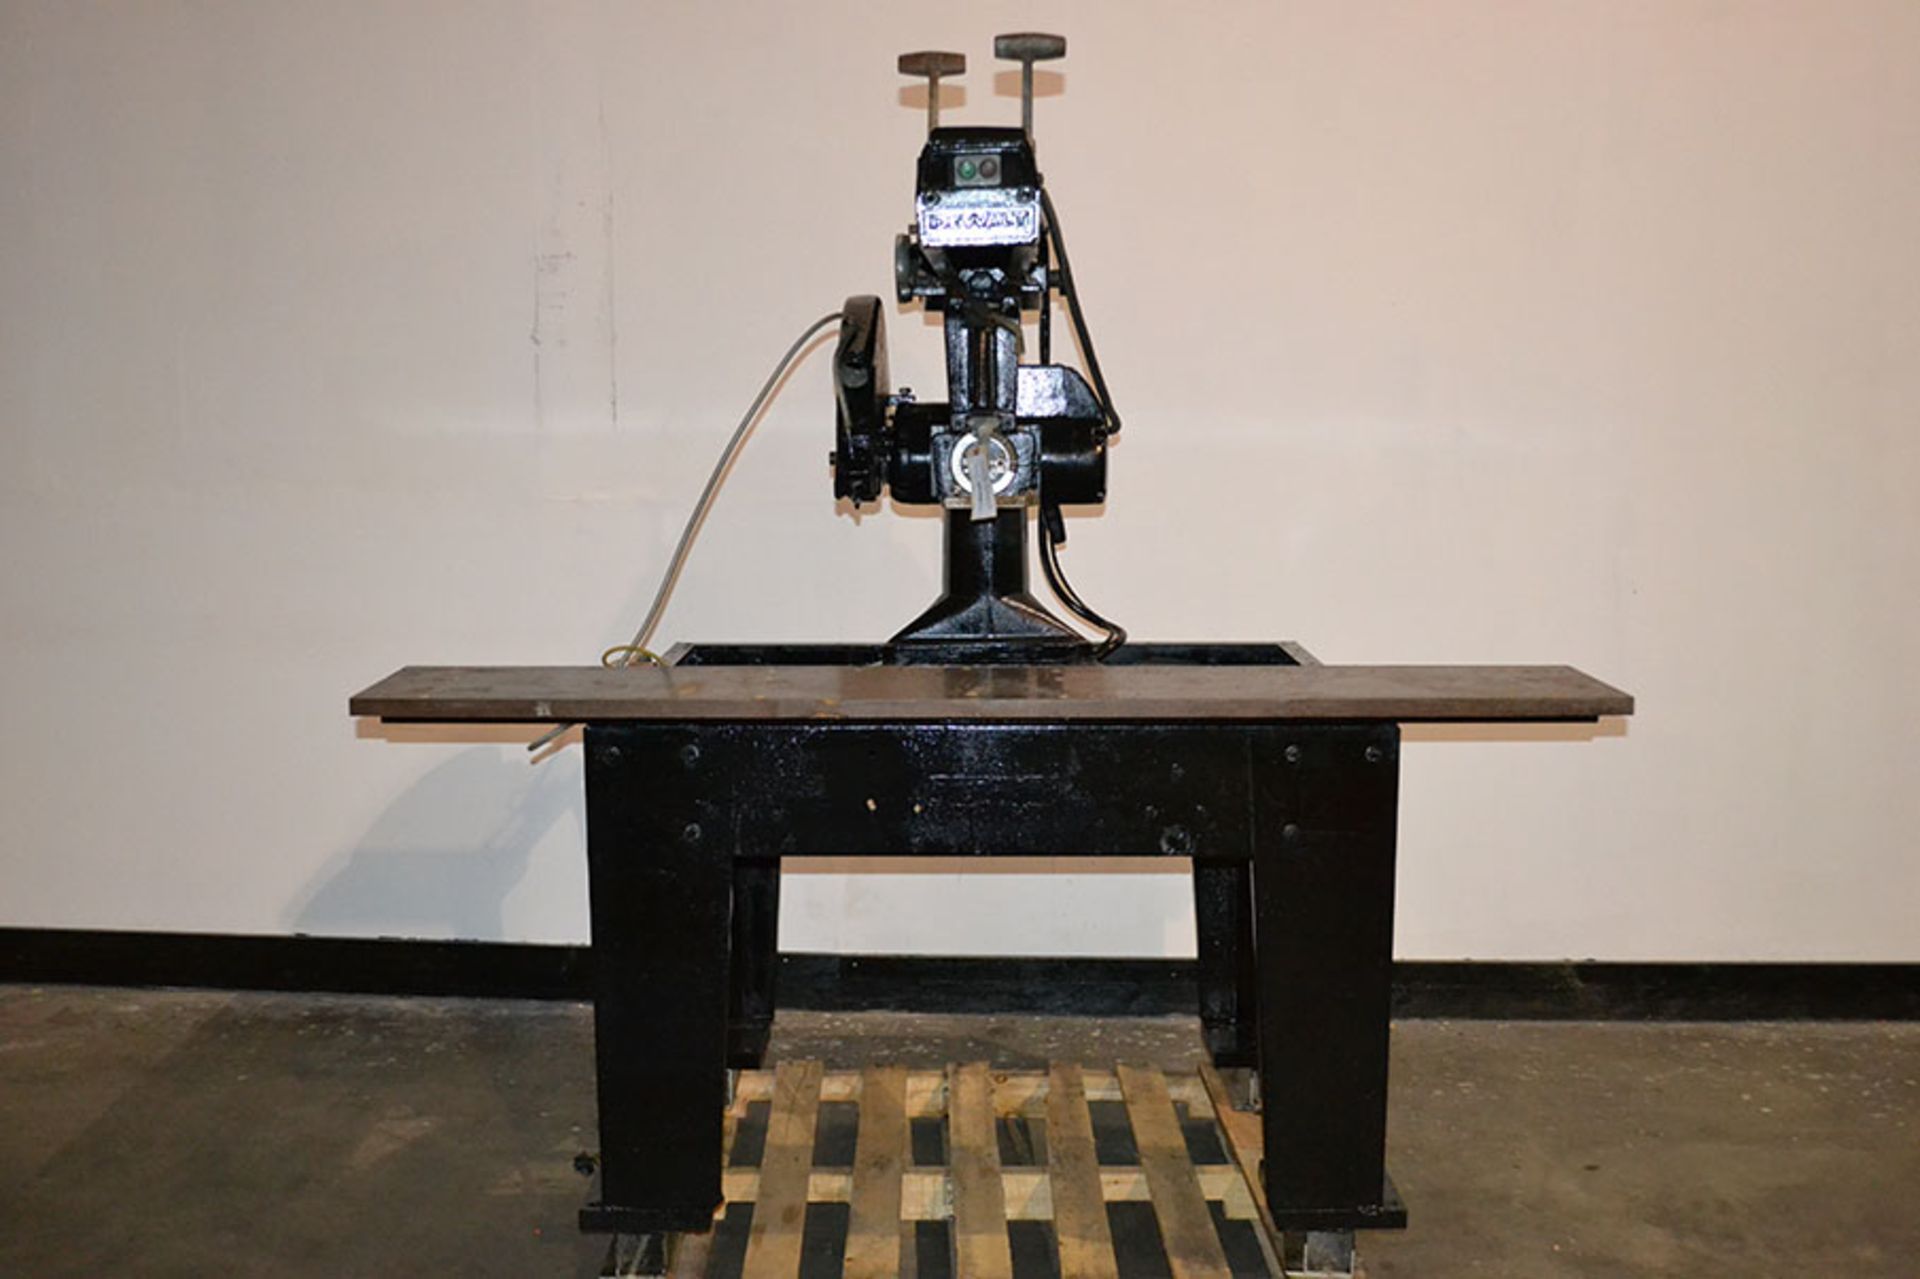 The Original 3558 20″ Super Duty 7.5HP Long Arm Radial Arm Saw - Image 2 of 9